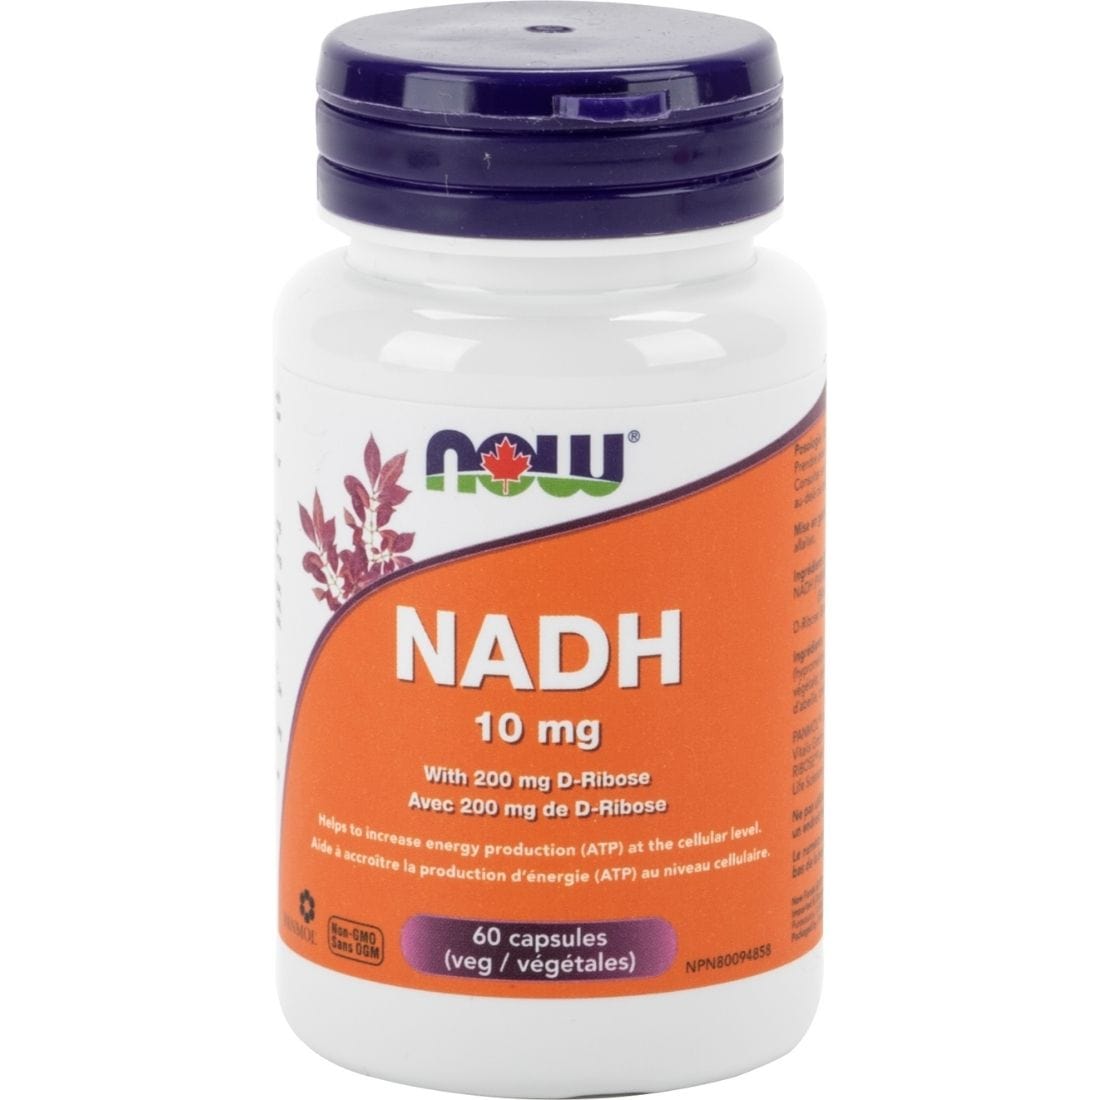 NOW NADH, 60 Capsules